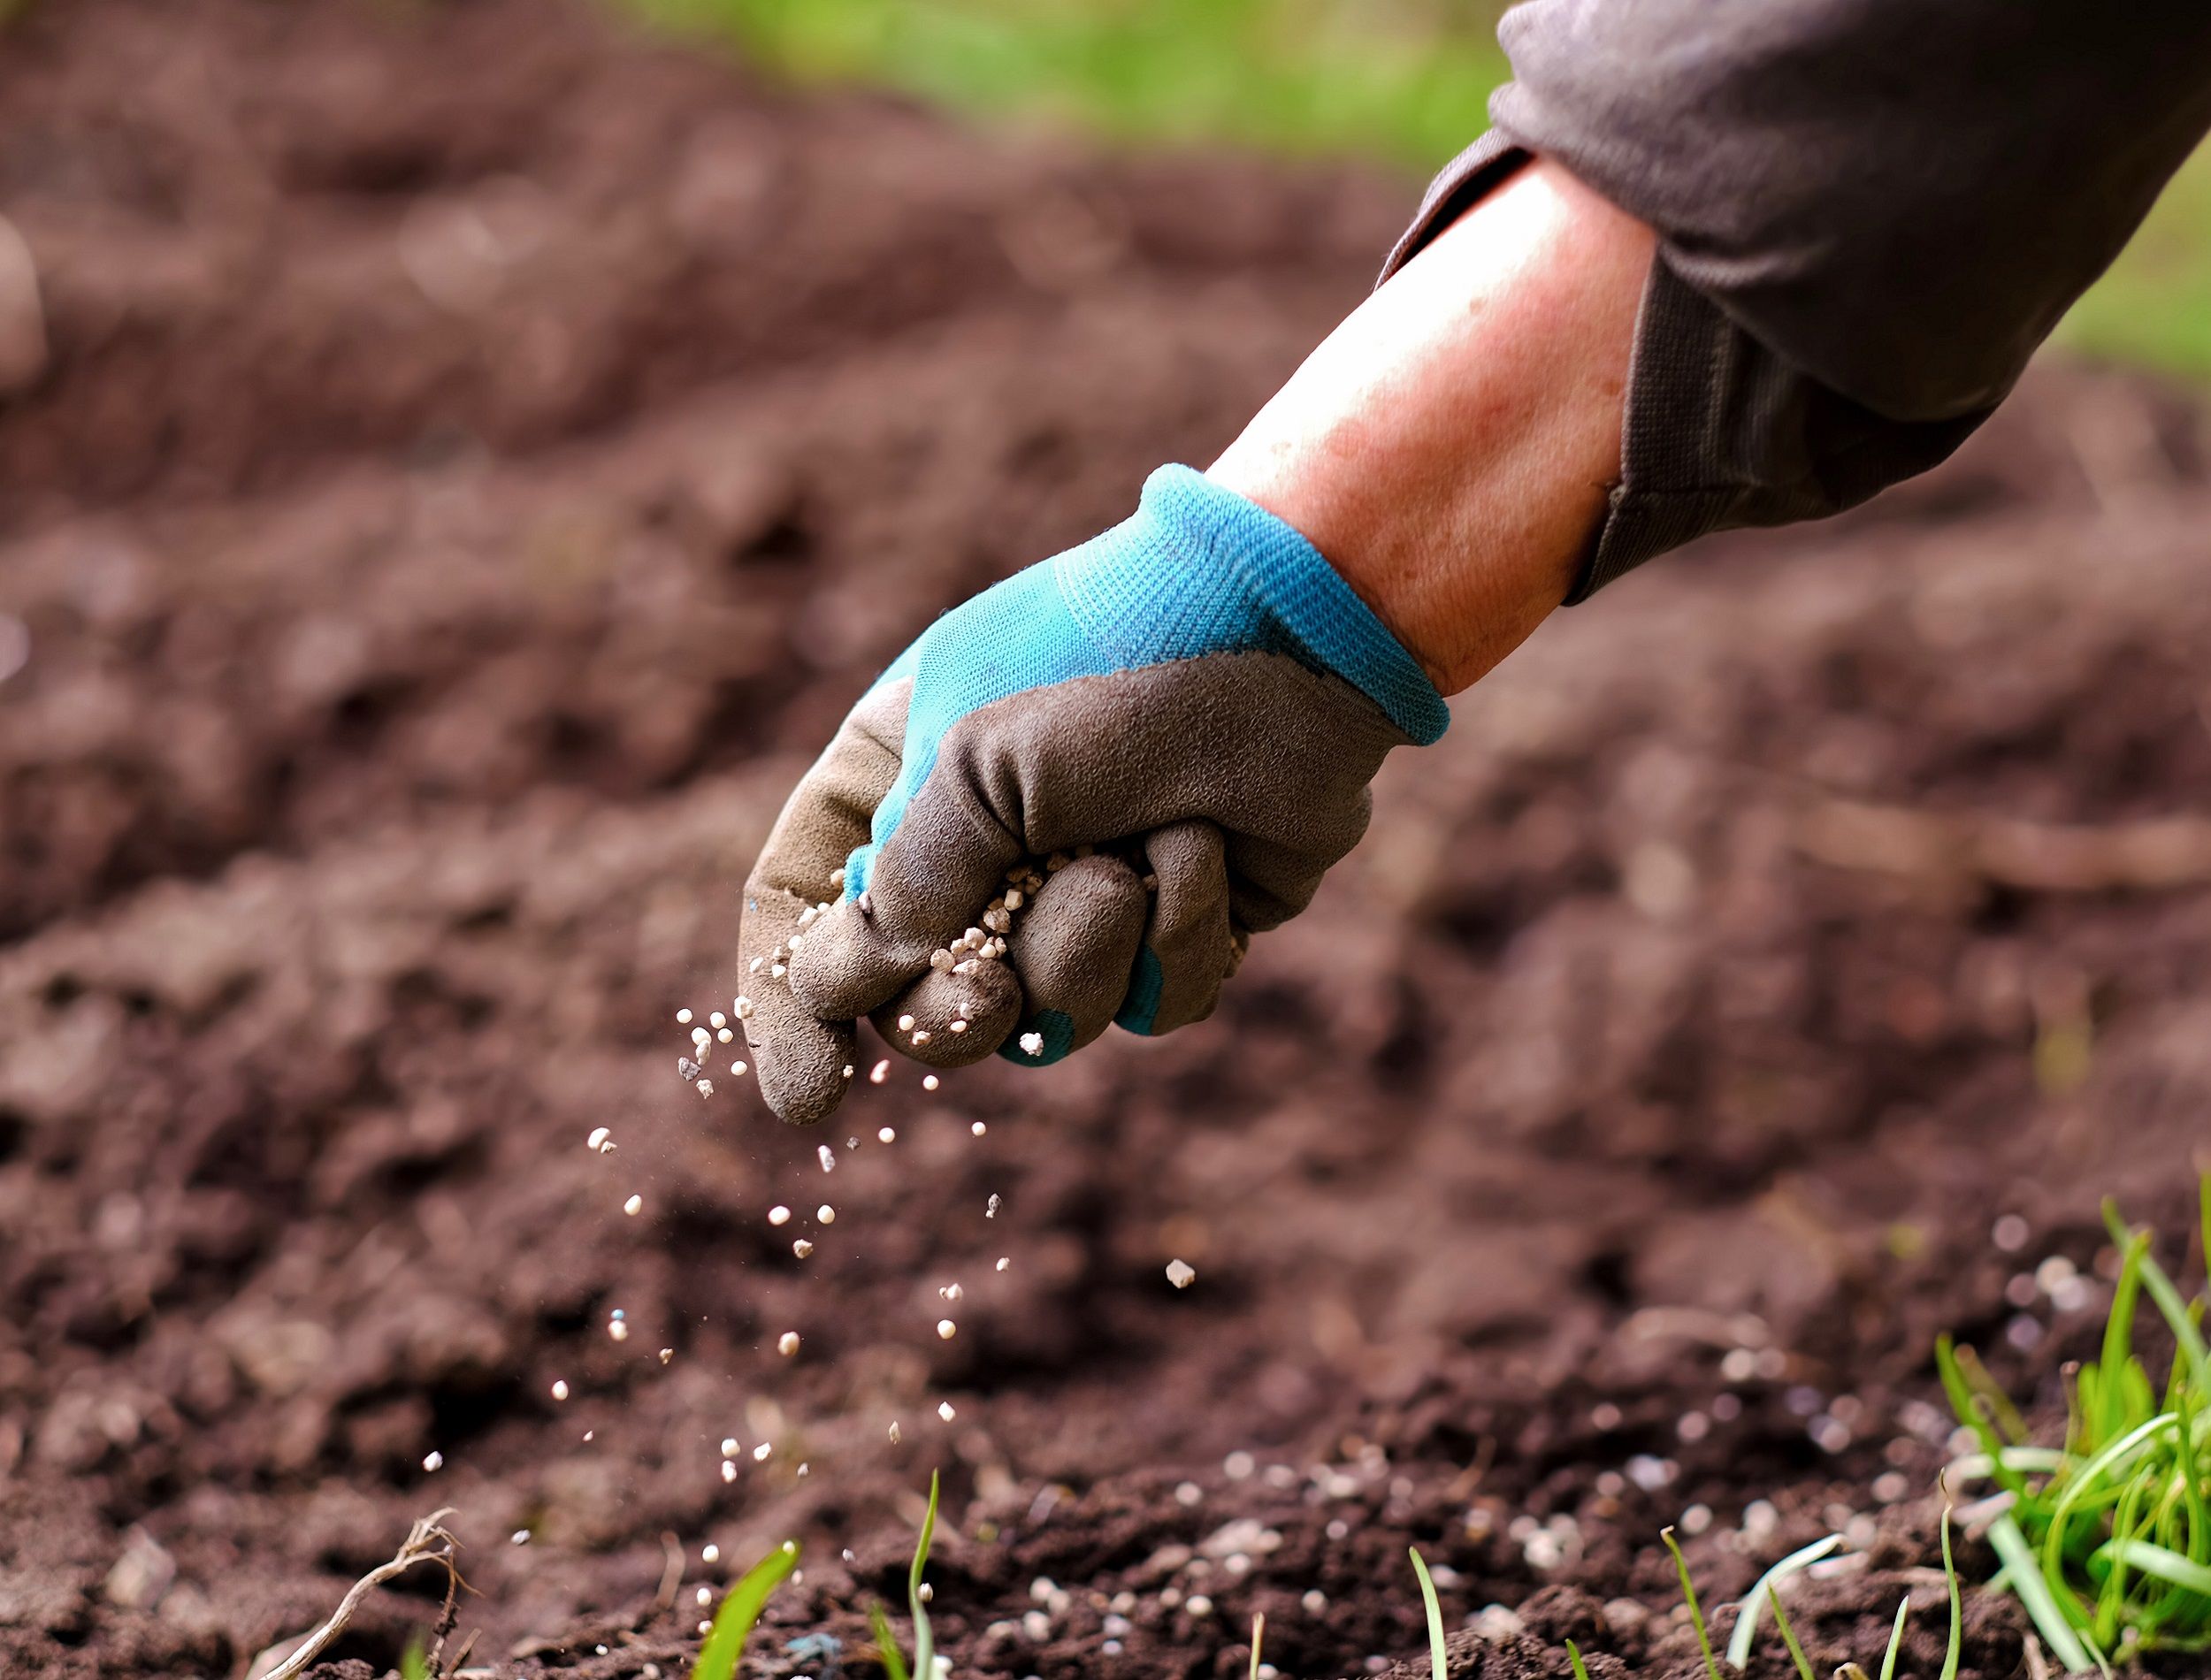 Gloved hand planting seeds outdoors